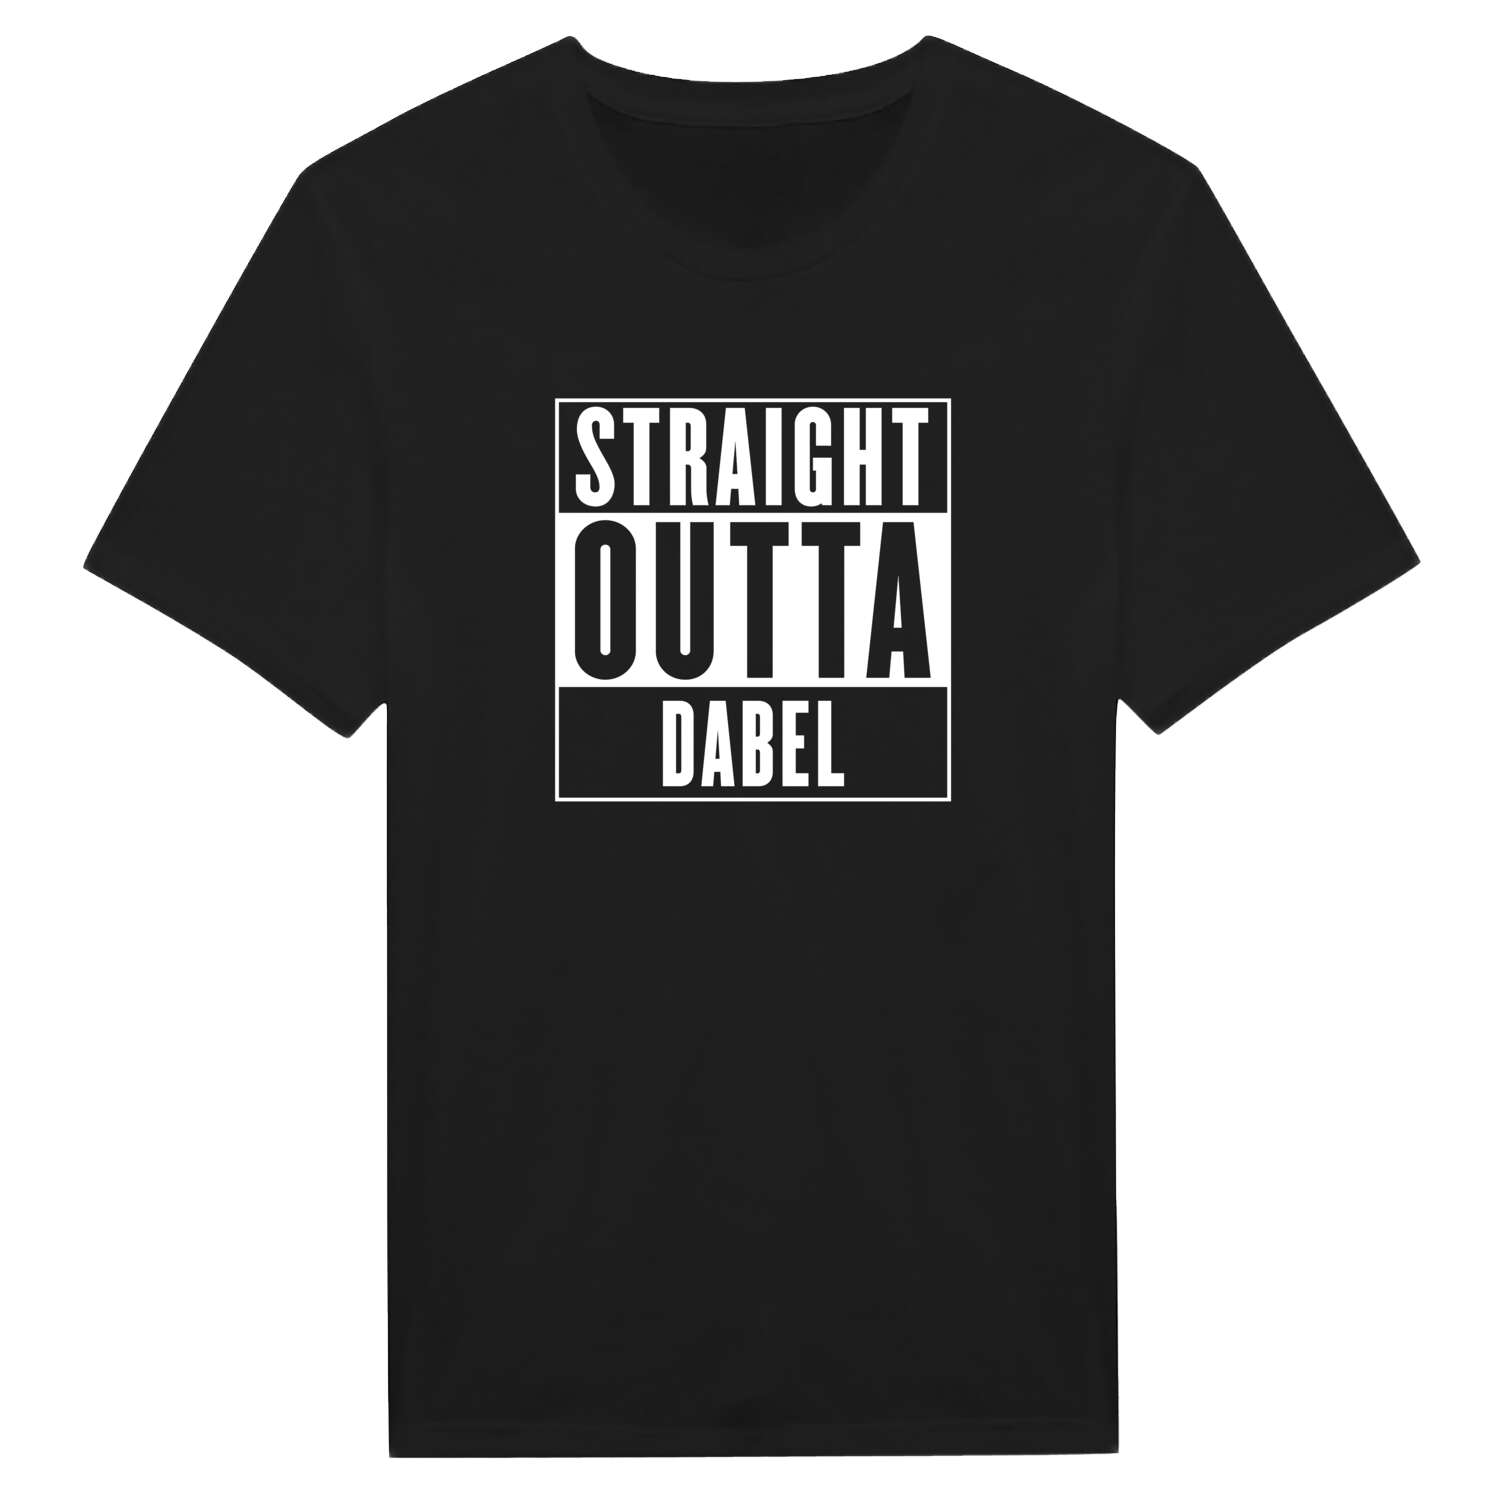 Dabel T-Shirt »Straight Outta«